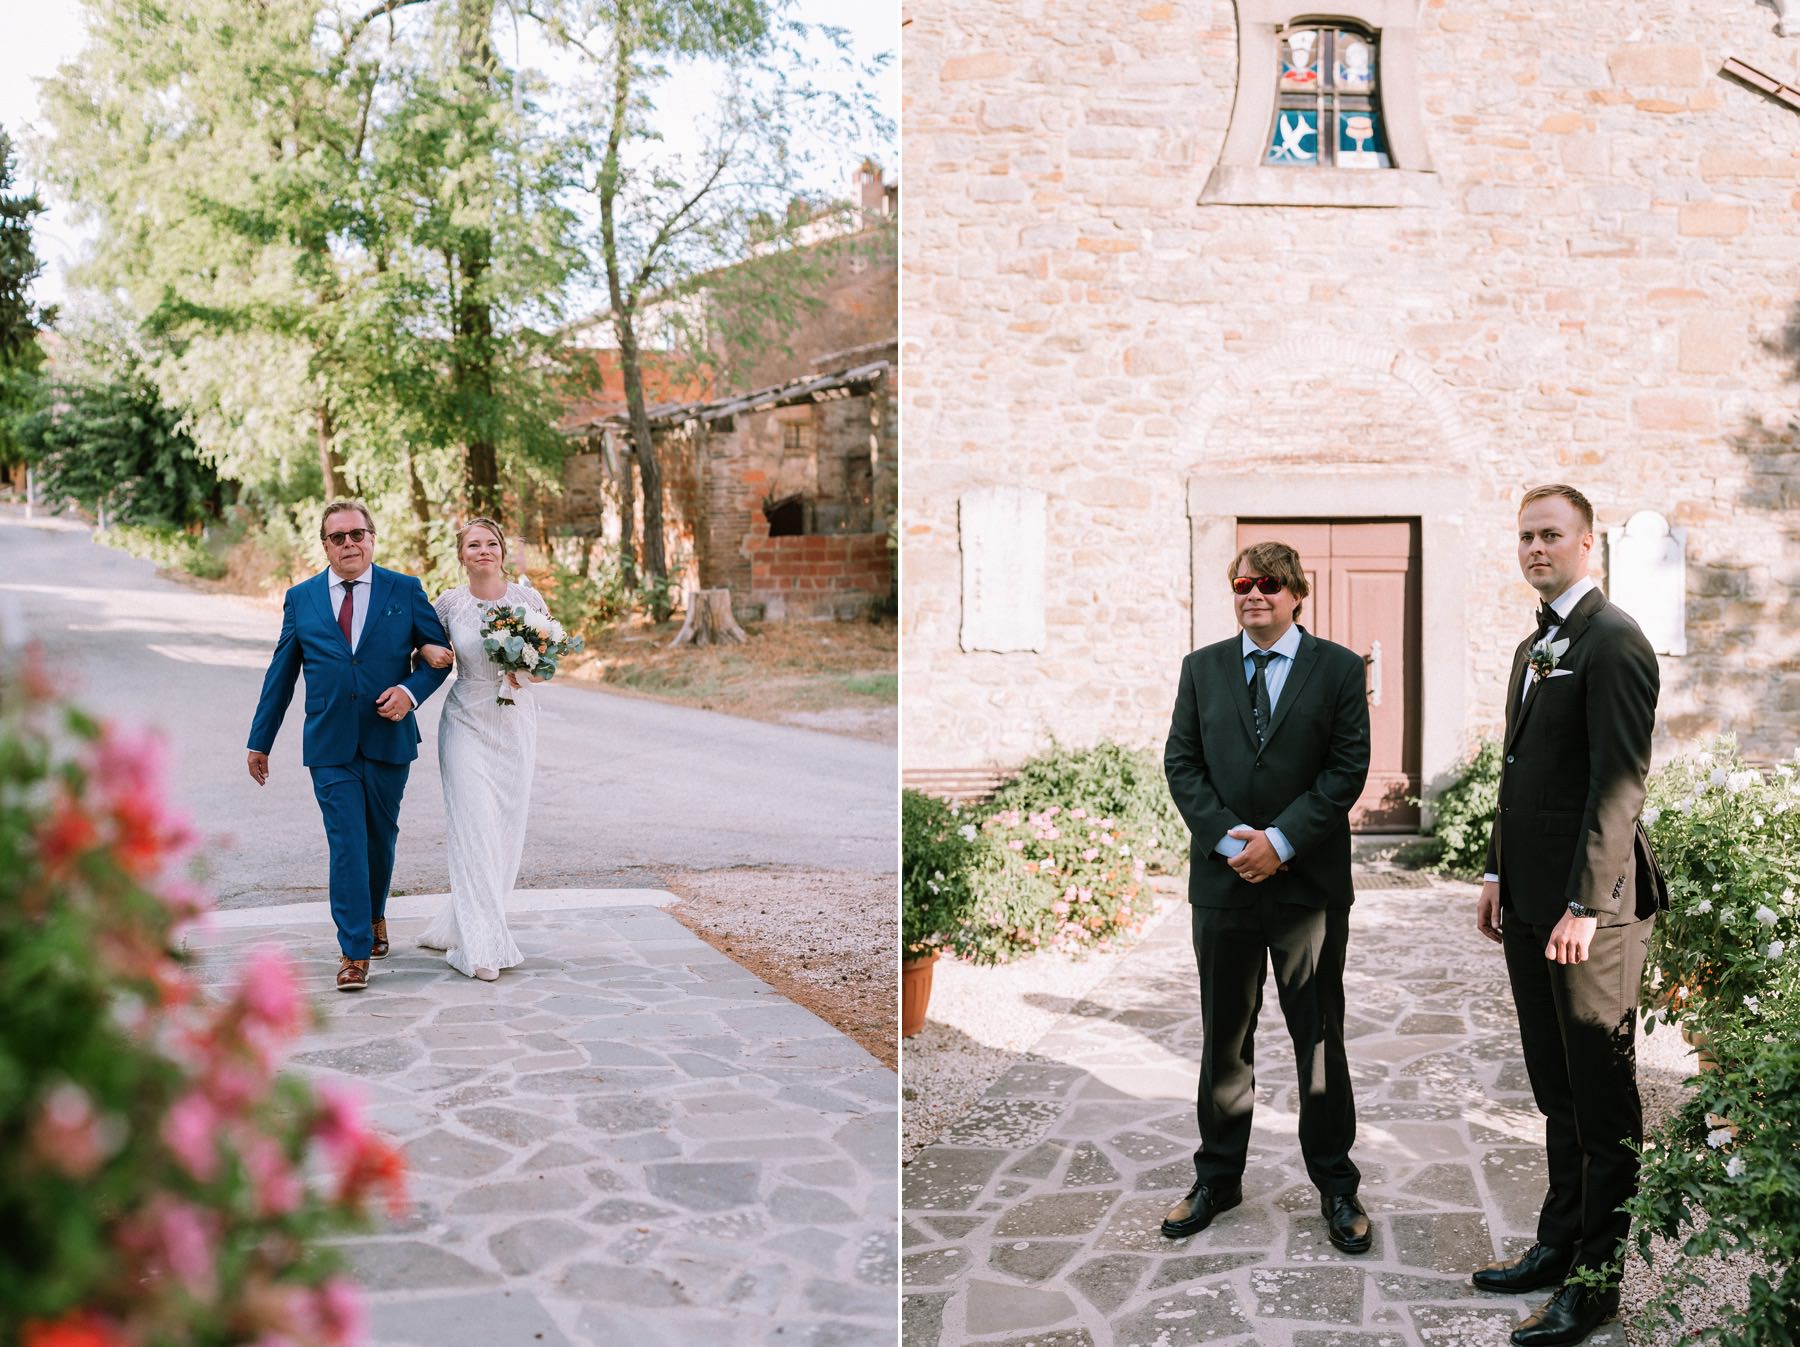 Finland wedding in Italy